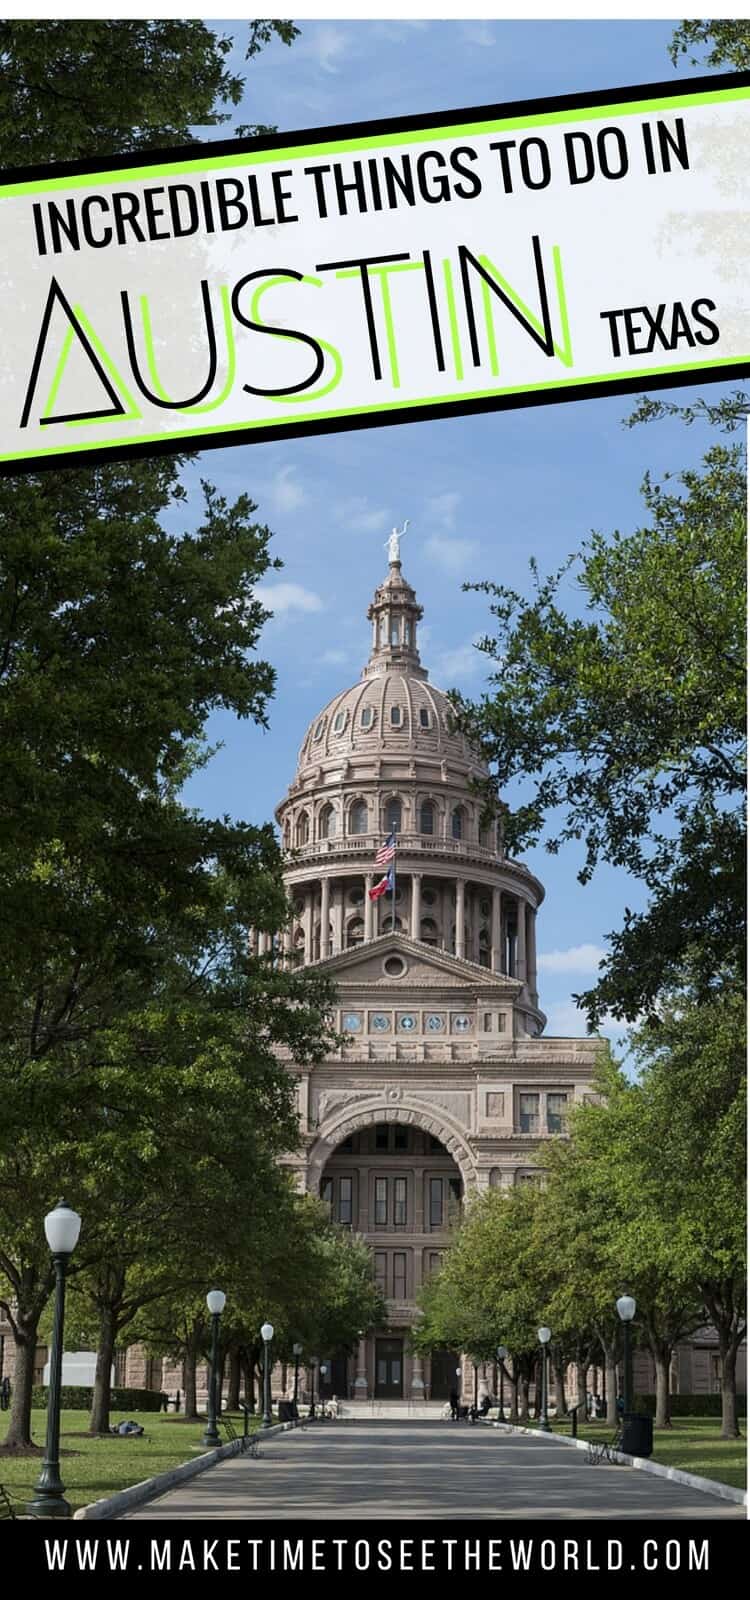 Things to do in Austin Tx